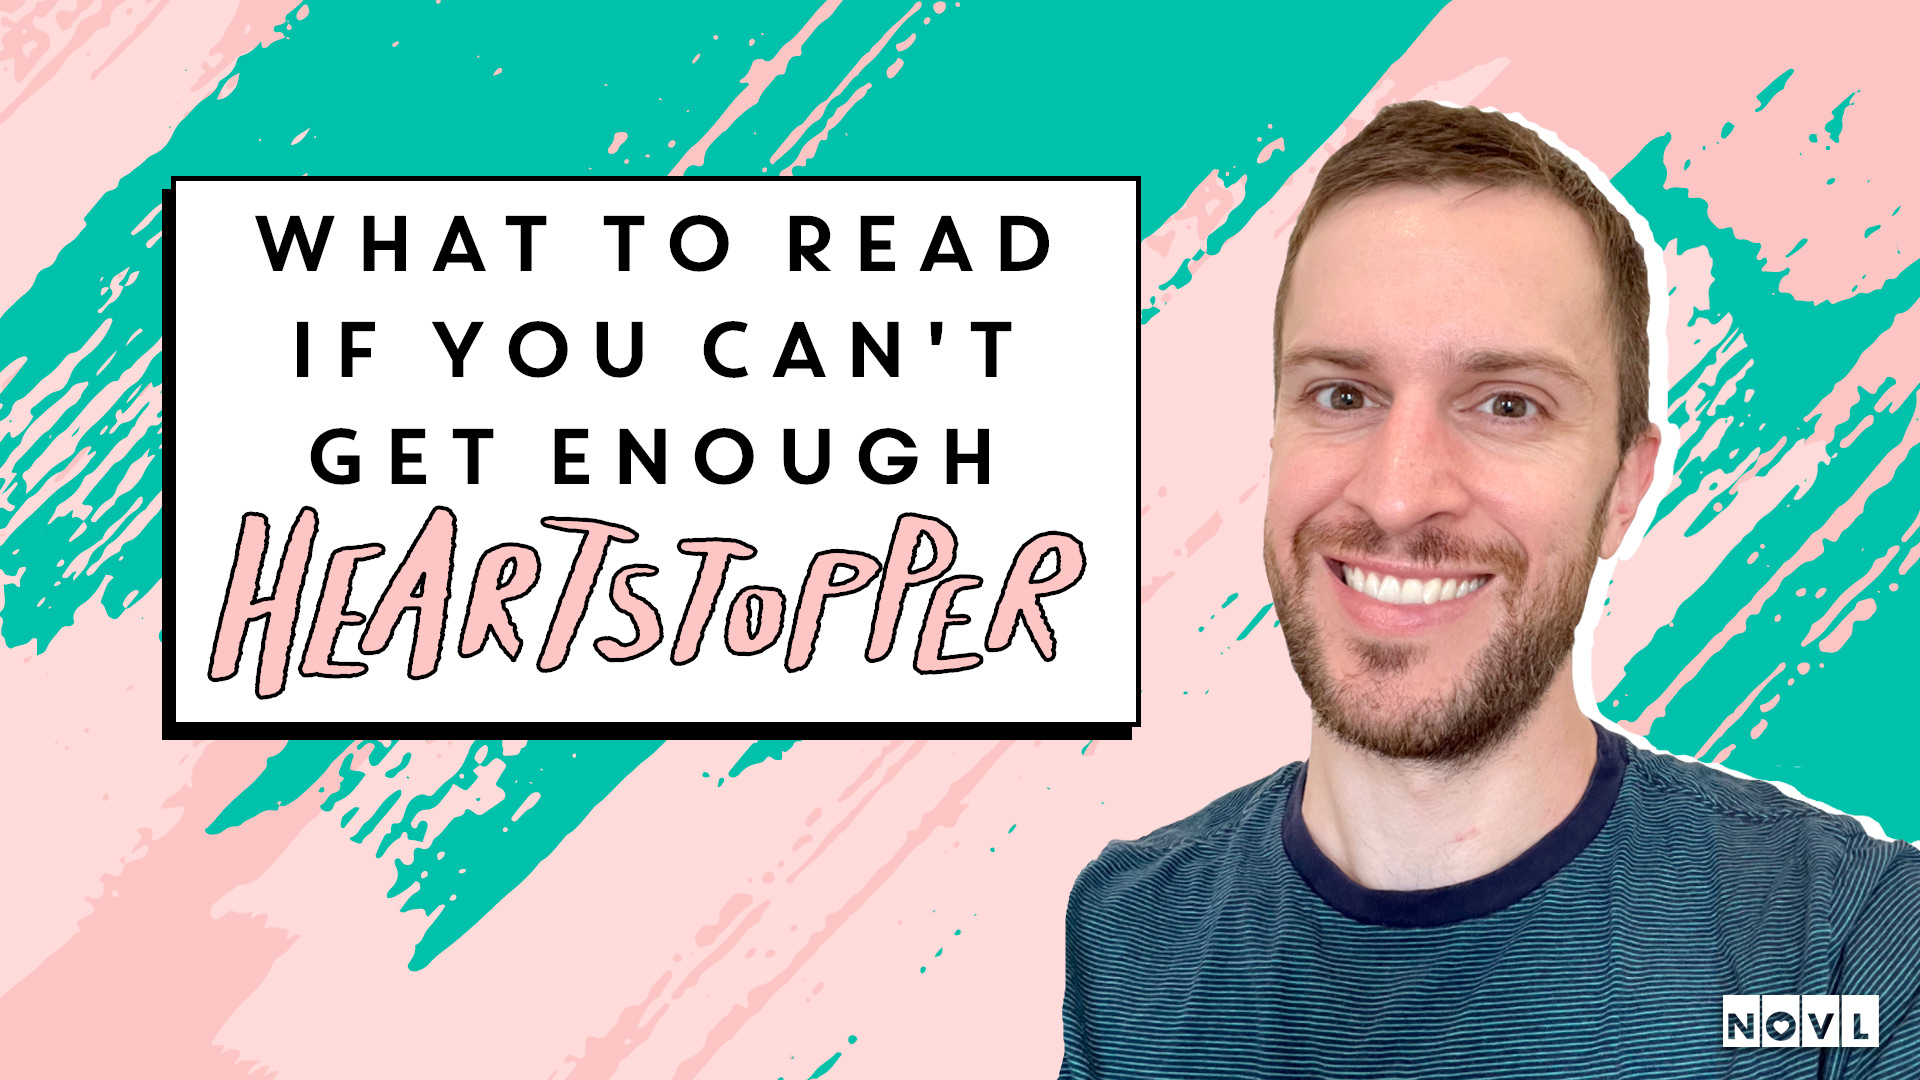 The NOVL Blog, Featured Image for Article: What to Read if You Can't Get Enough Heartstopper